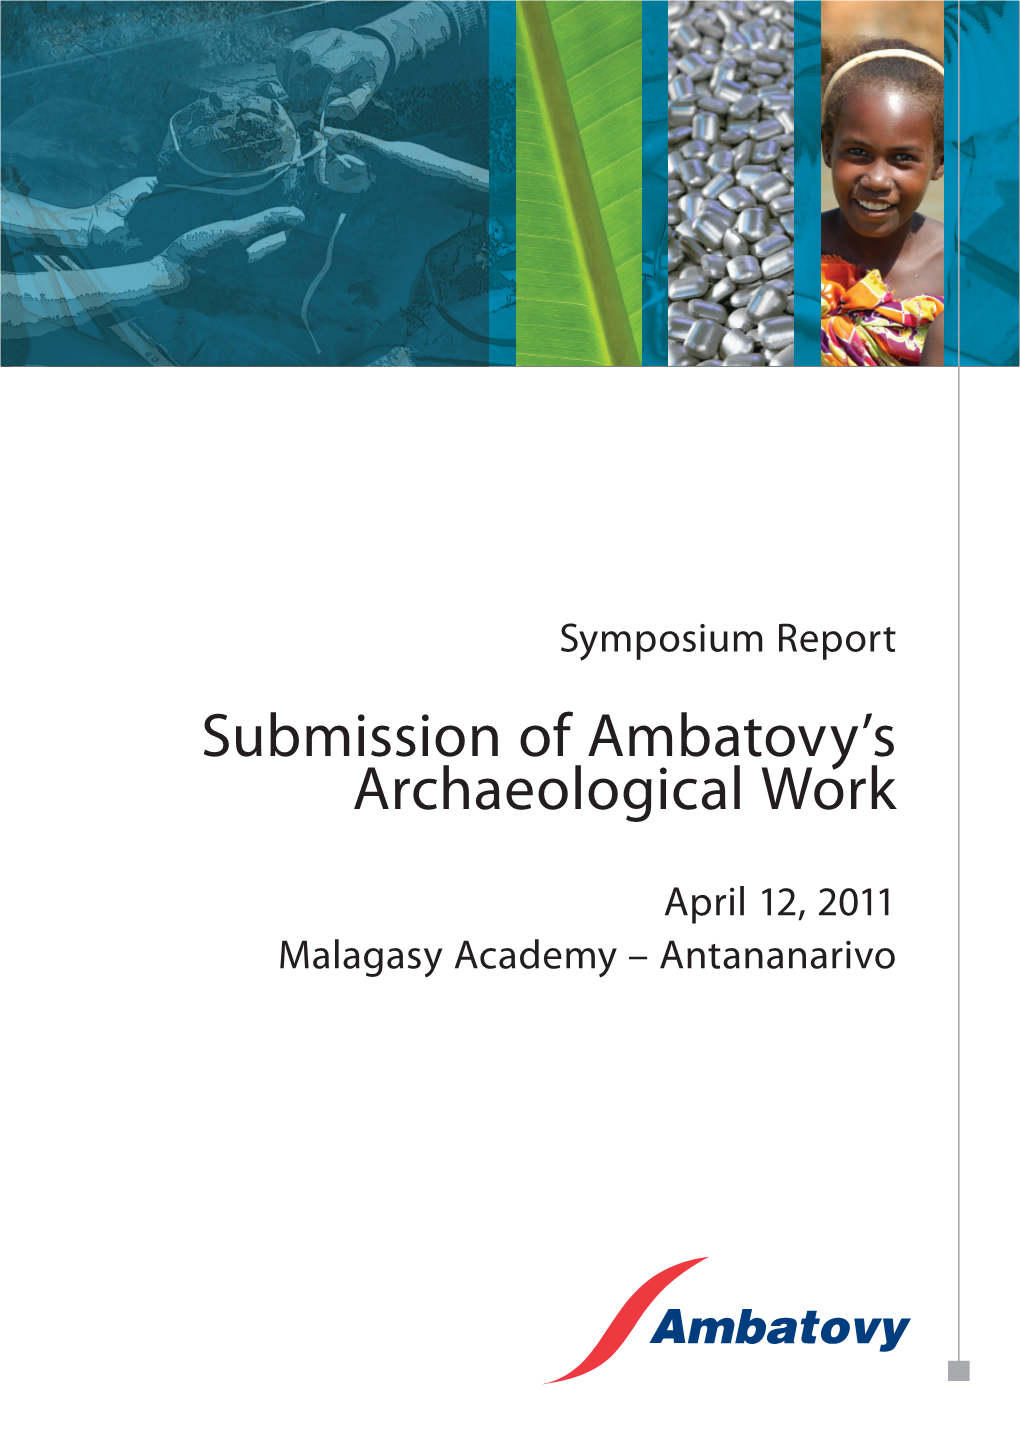 Submission of Ambatovy's Archaeological Work